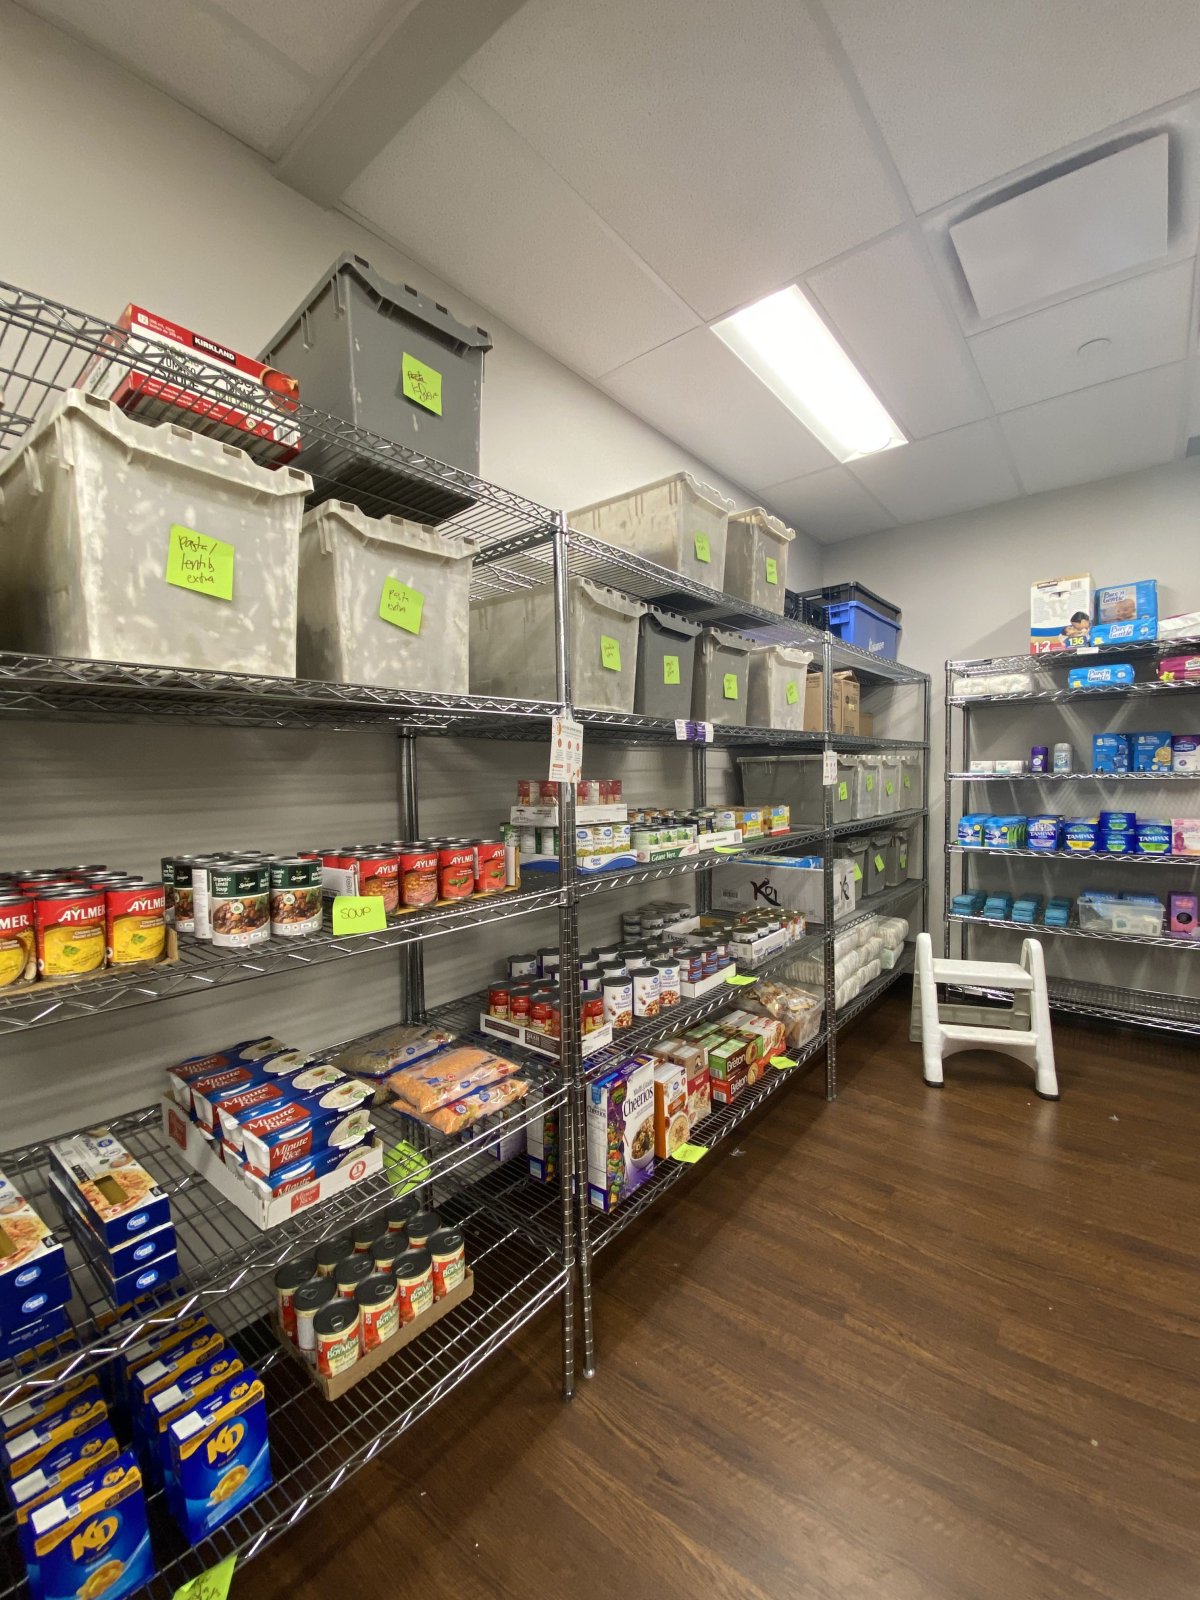 The food bank reported a more than 50 per cent increase in use between 2021 and 2022, with more than 1000 students using the walk-in service last year.